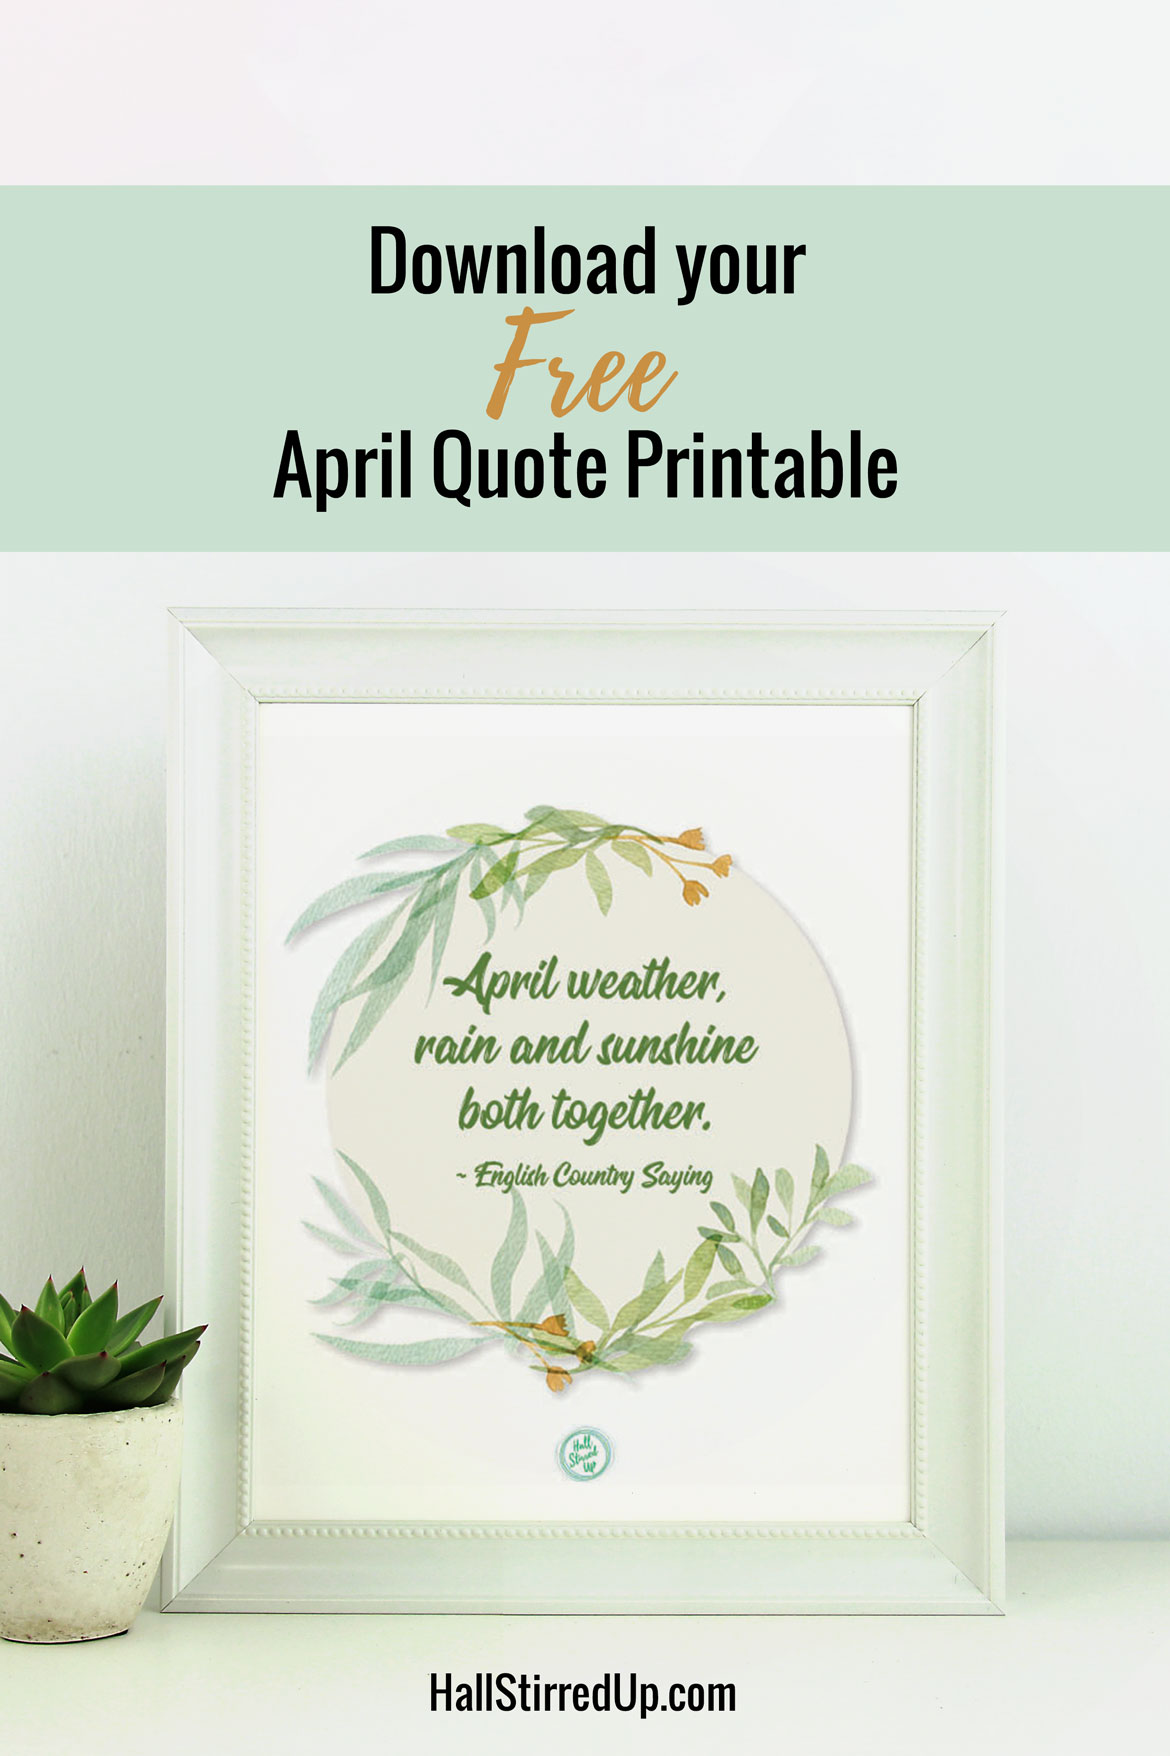 My favorite April quote and a fun new printable